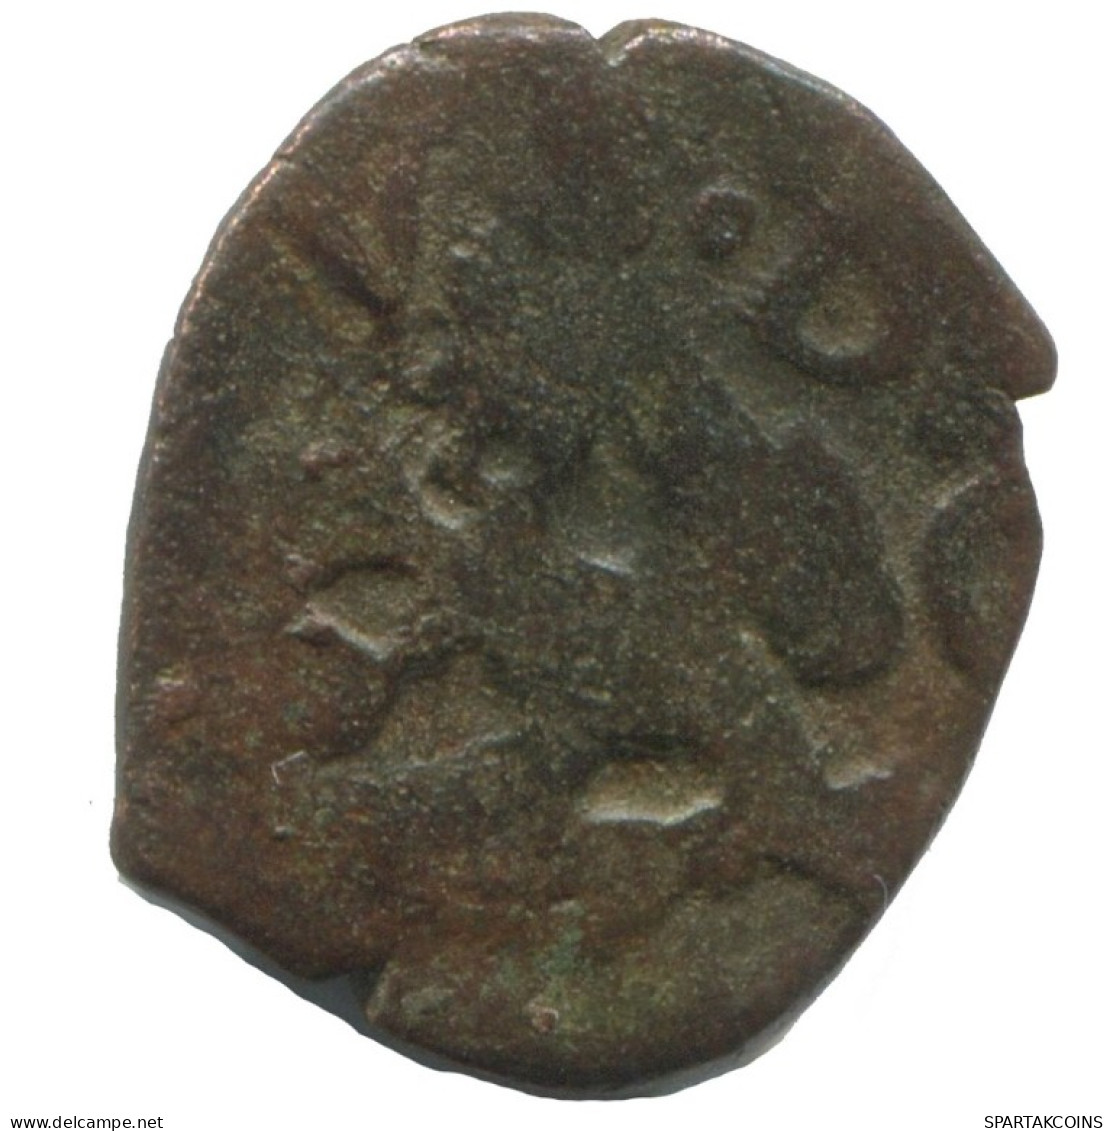 Authentic Original MEDIEVAL EUROPEAN Coin 2.2g/18mm #AC289.8.D.A - Other - Europe